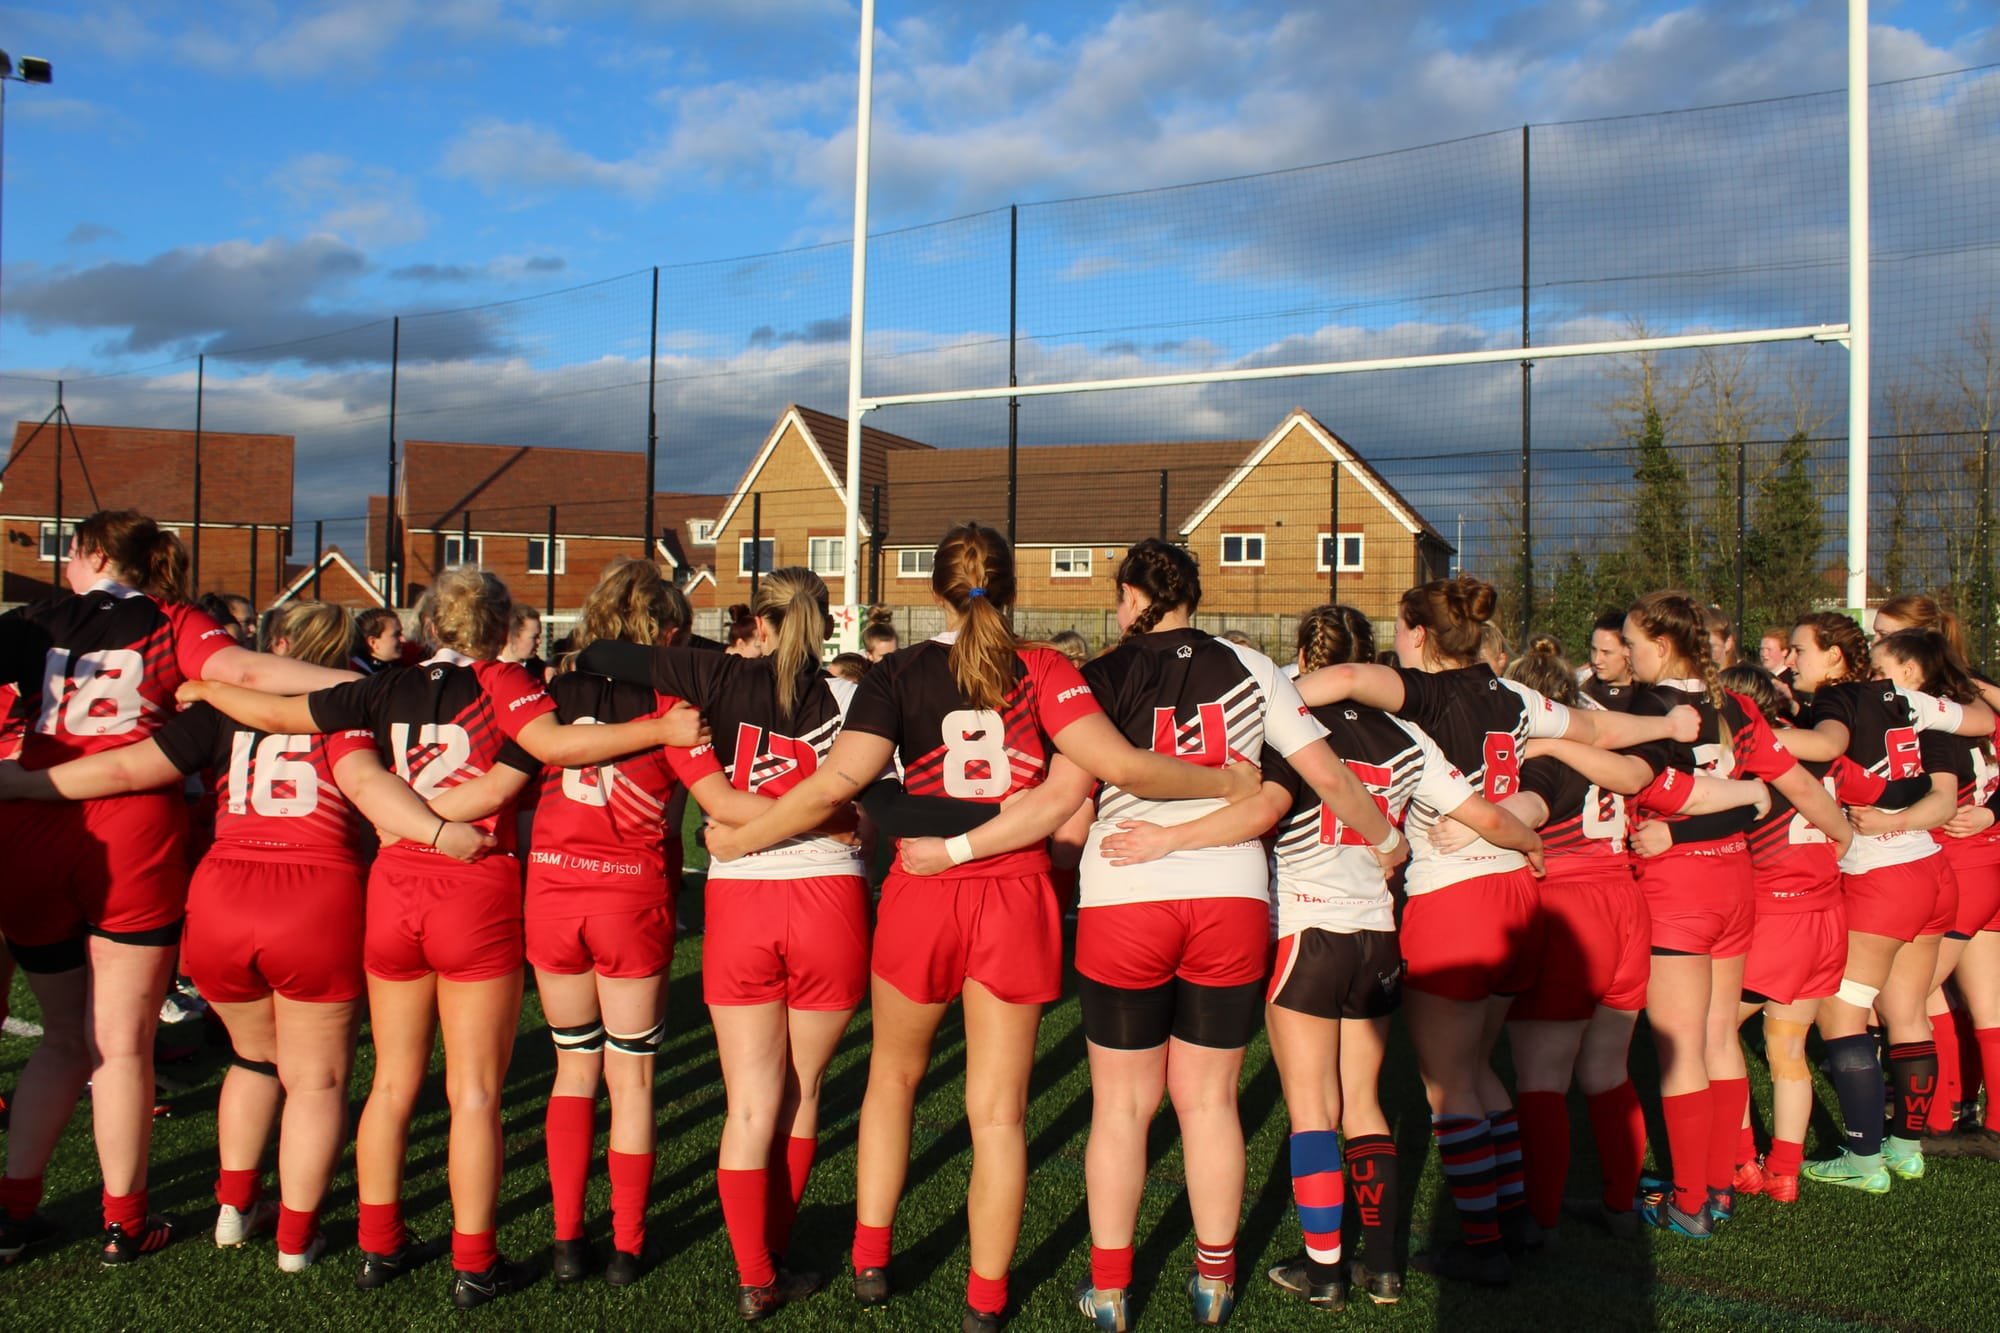 UWE WOMEN'S RUGBY ANNUAL MADDY'S MATCH DAY